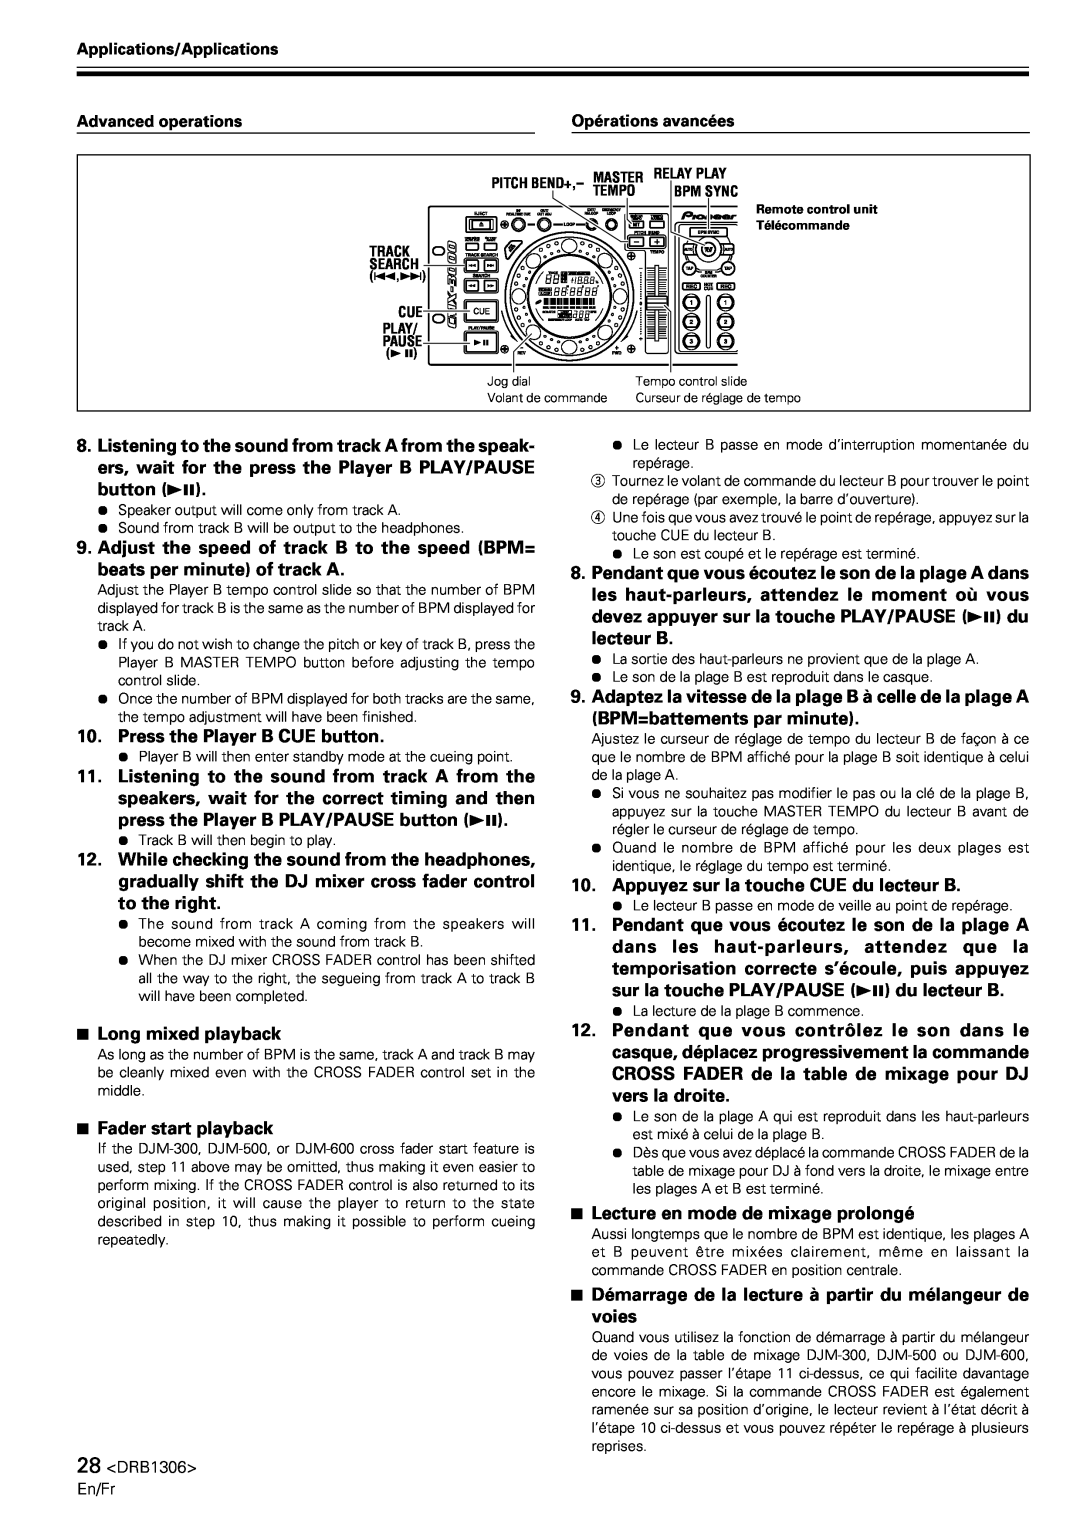 Pioneer CMX-3000 operating instructions Adjust the speed of track B to the speed BPM= 